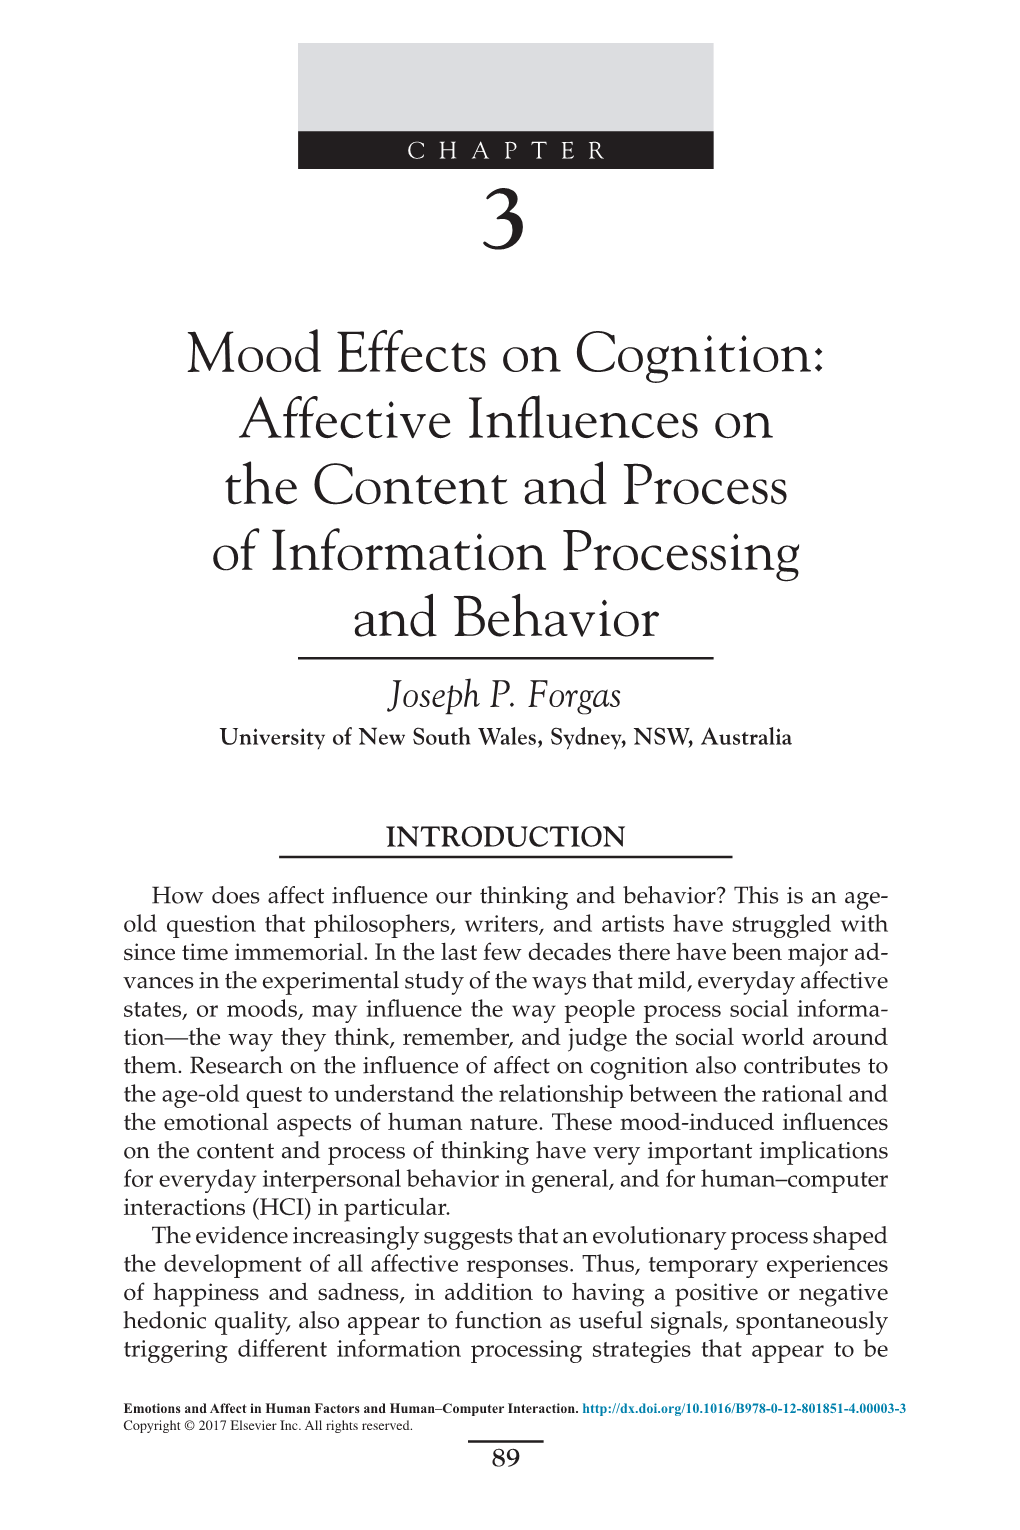 Mood Effects on Cognition: Affective Influences on the Content and Process of Information Processing and Behavior Joseph P